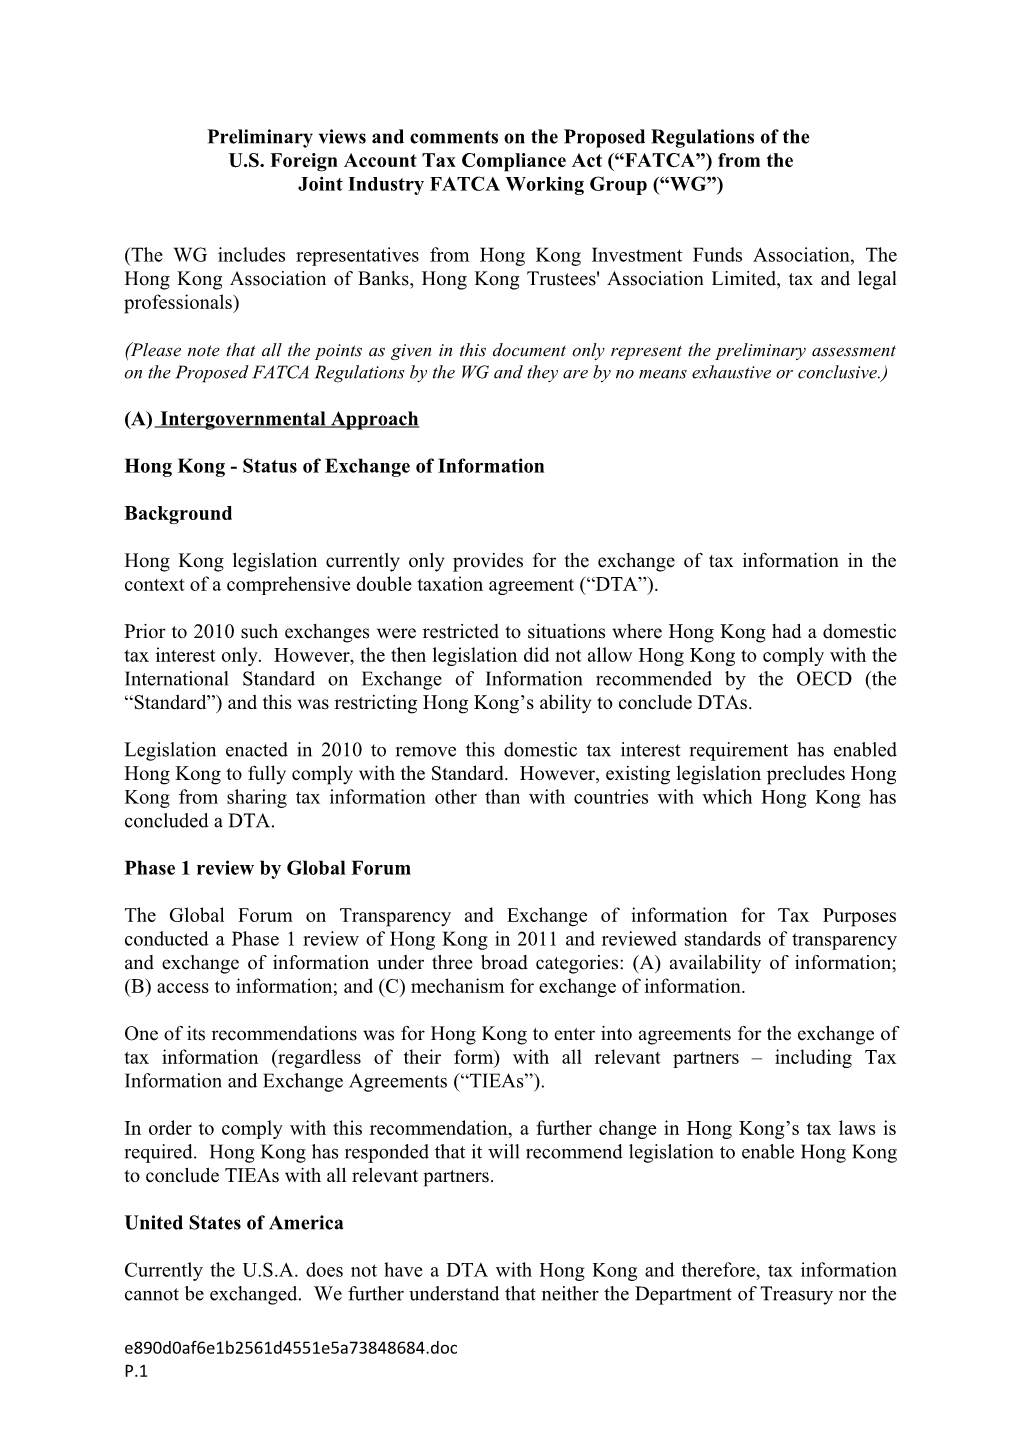 Pwc, and KPMG and ,Dechert and HKTA Comments 28 February 2012